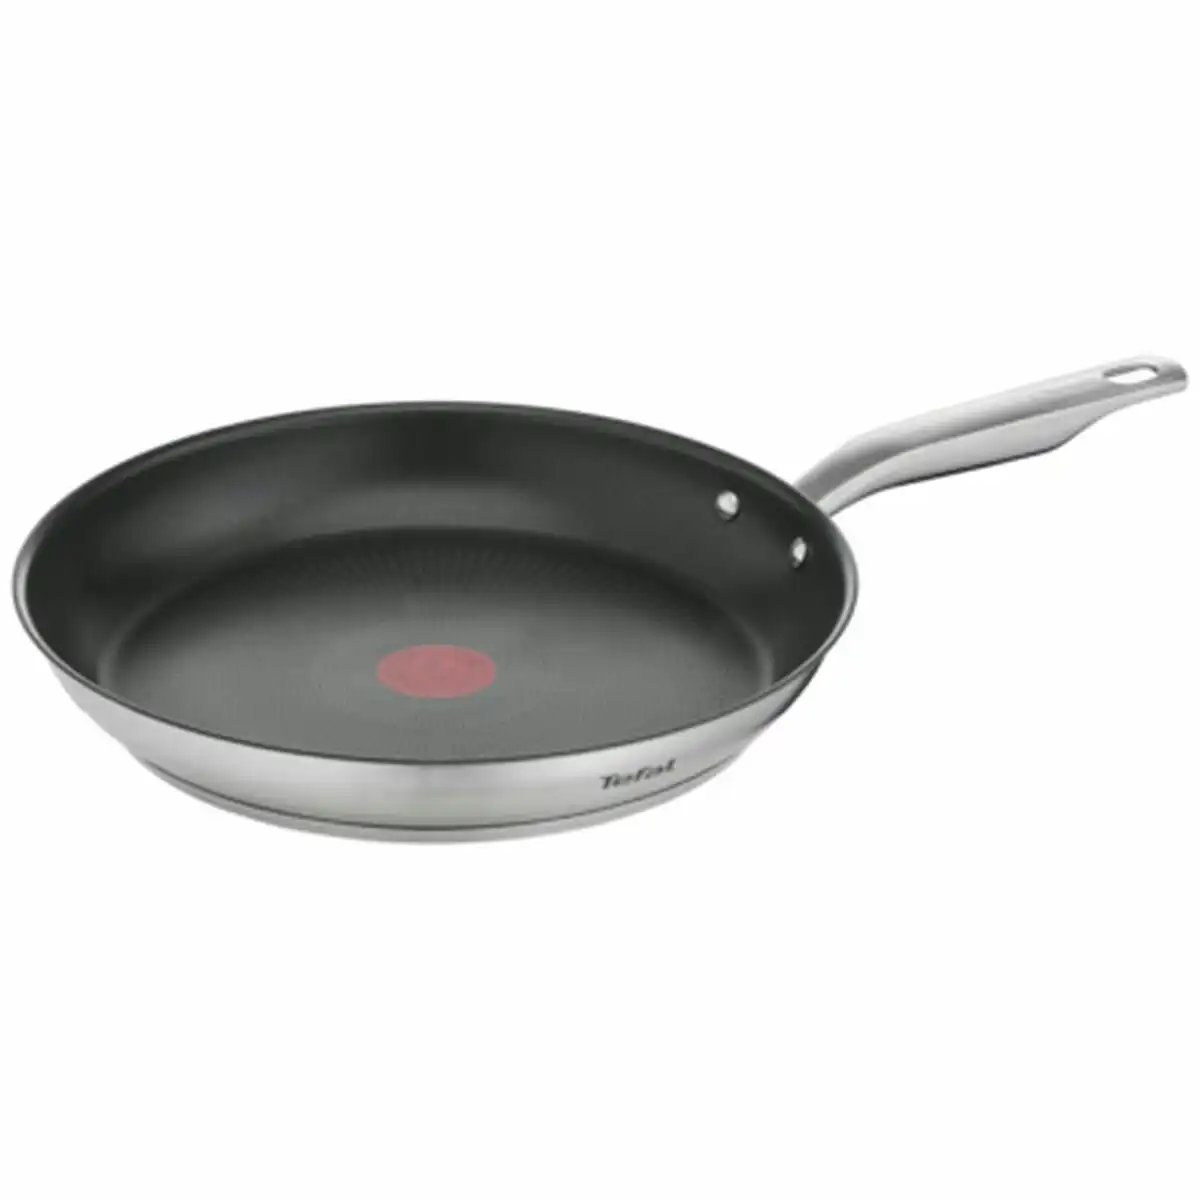 Tefal 30cm Virtuoso Stainless Steel Non-stick Induction Frying Pan